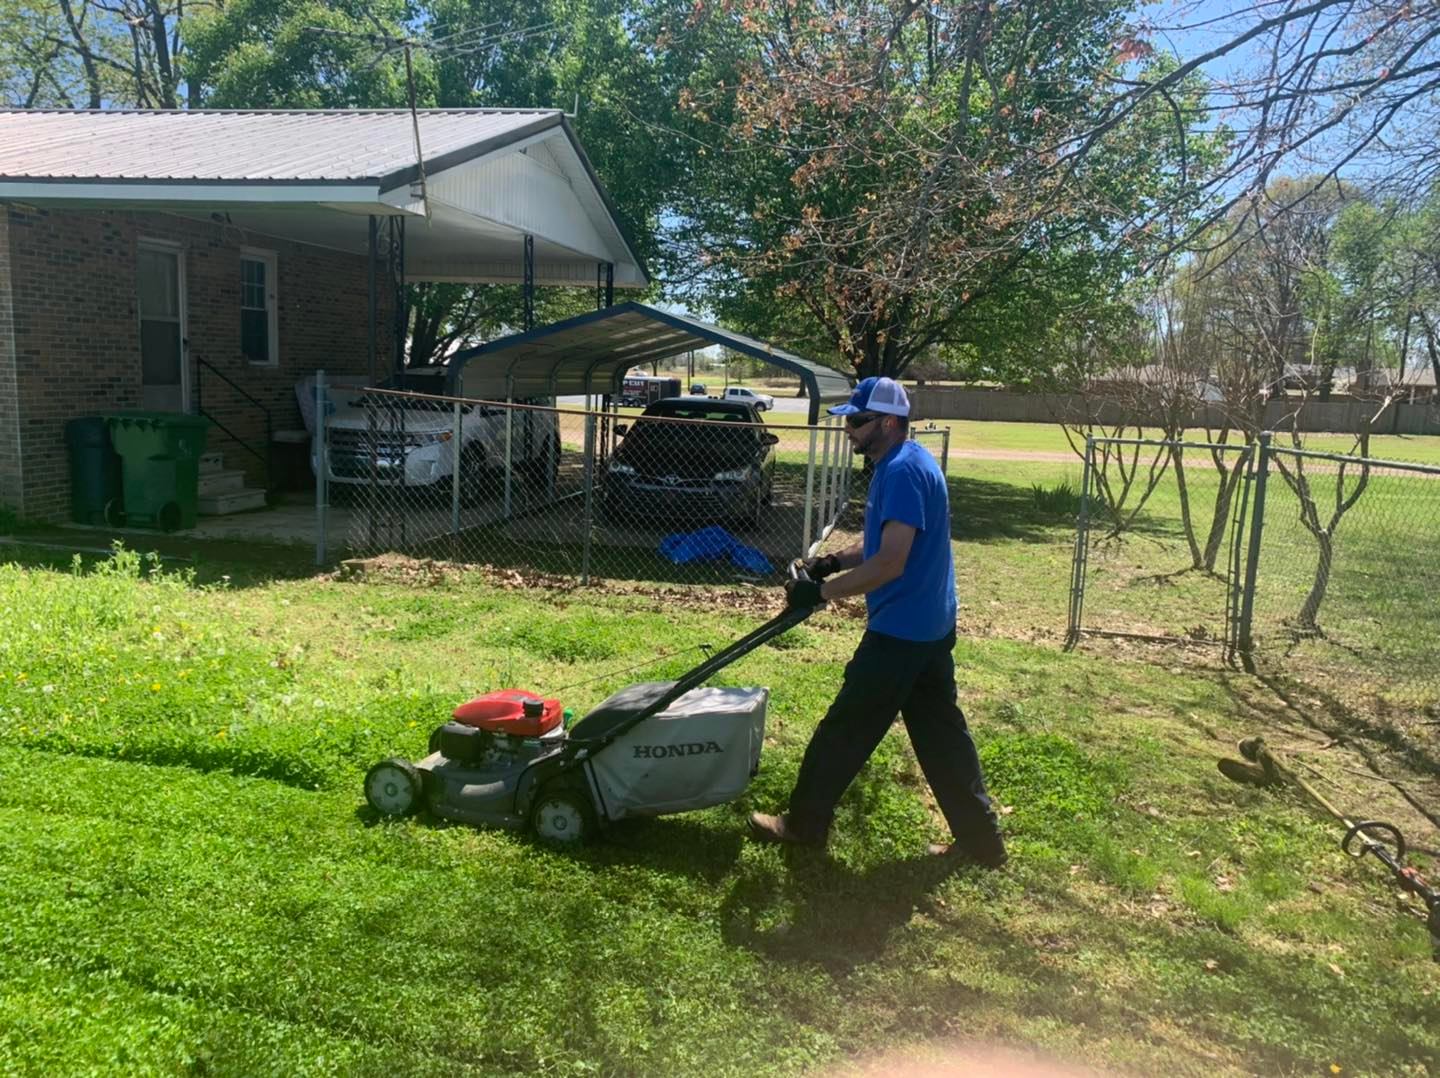 Top Cut Lawn Service 330 TN-189, Maury City Tennessee 38050